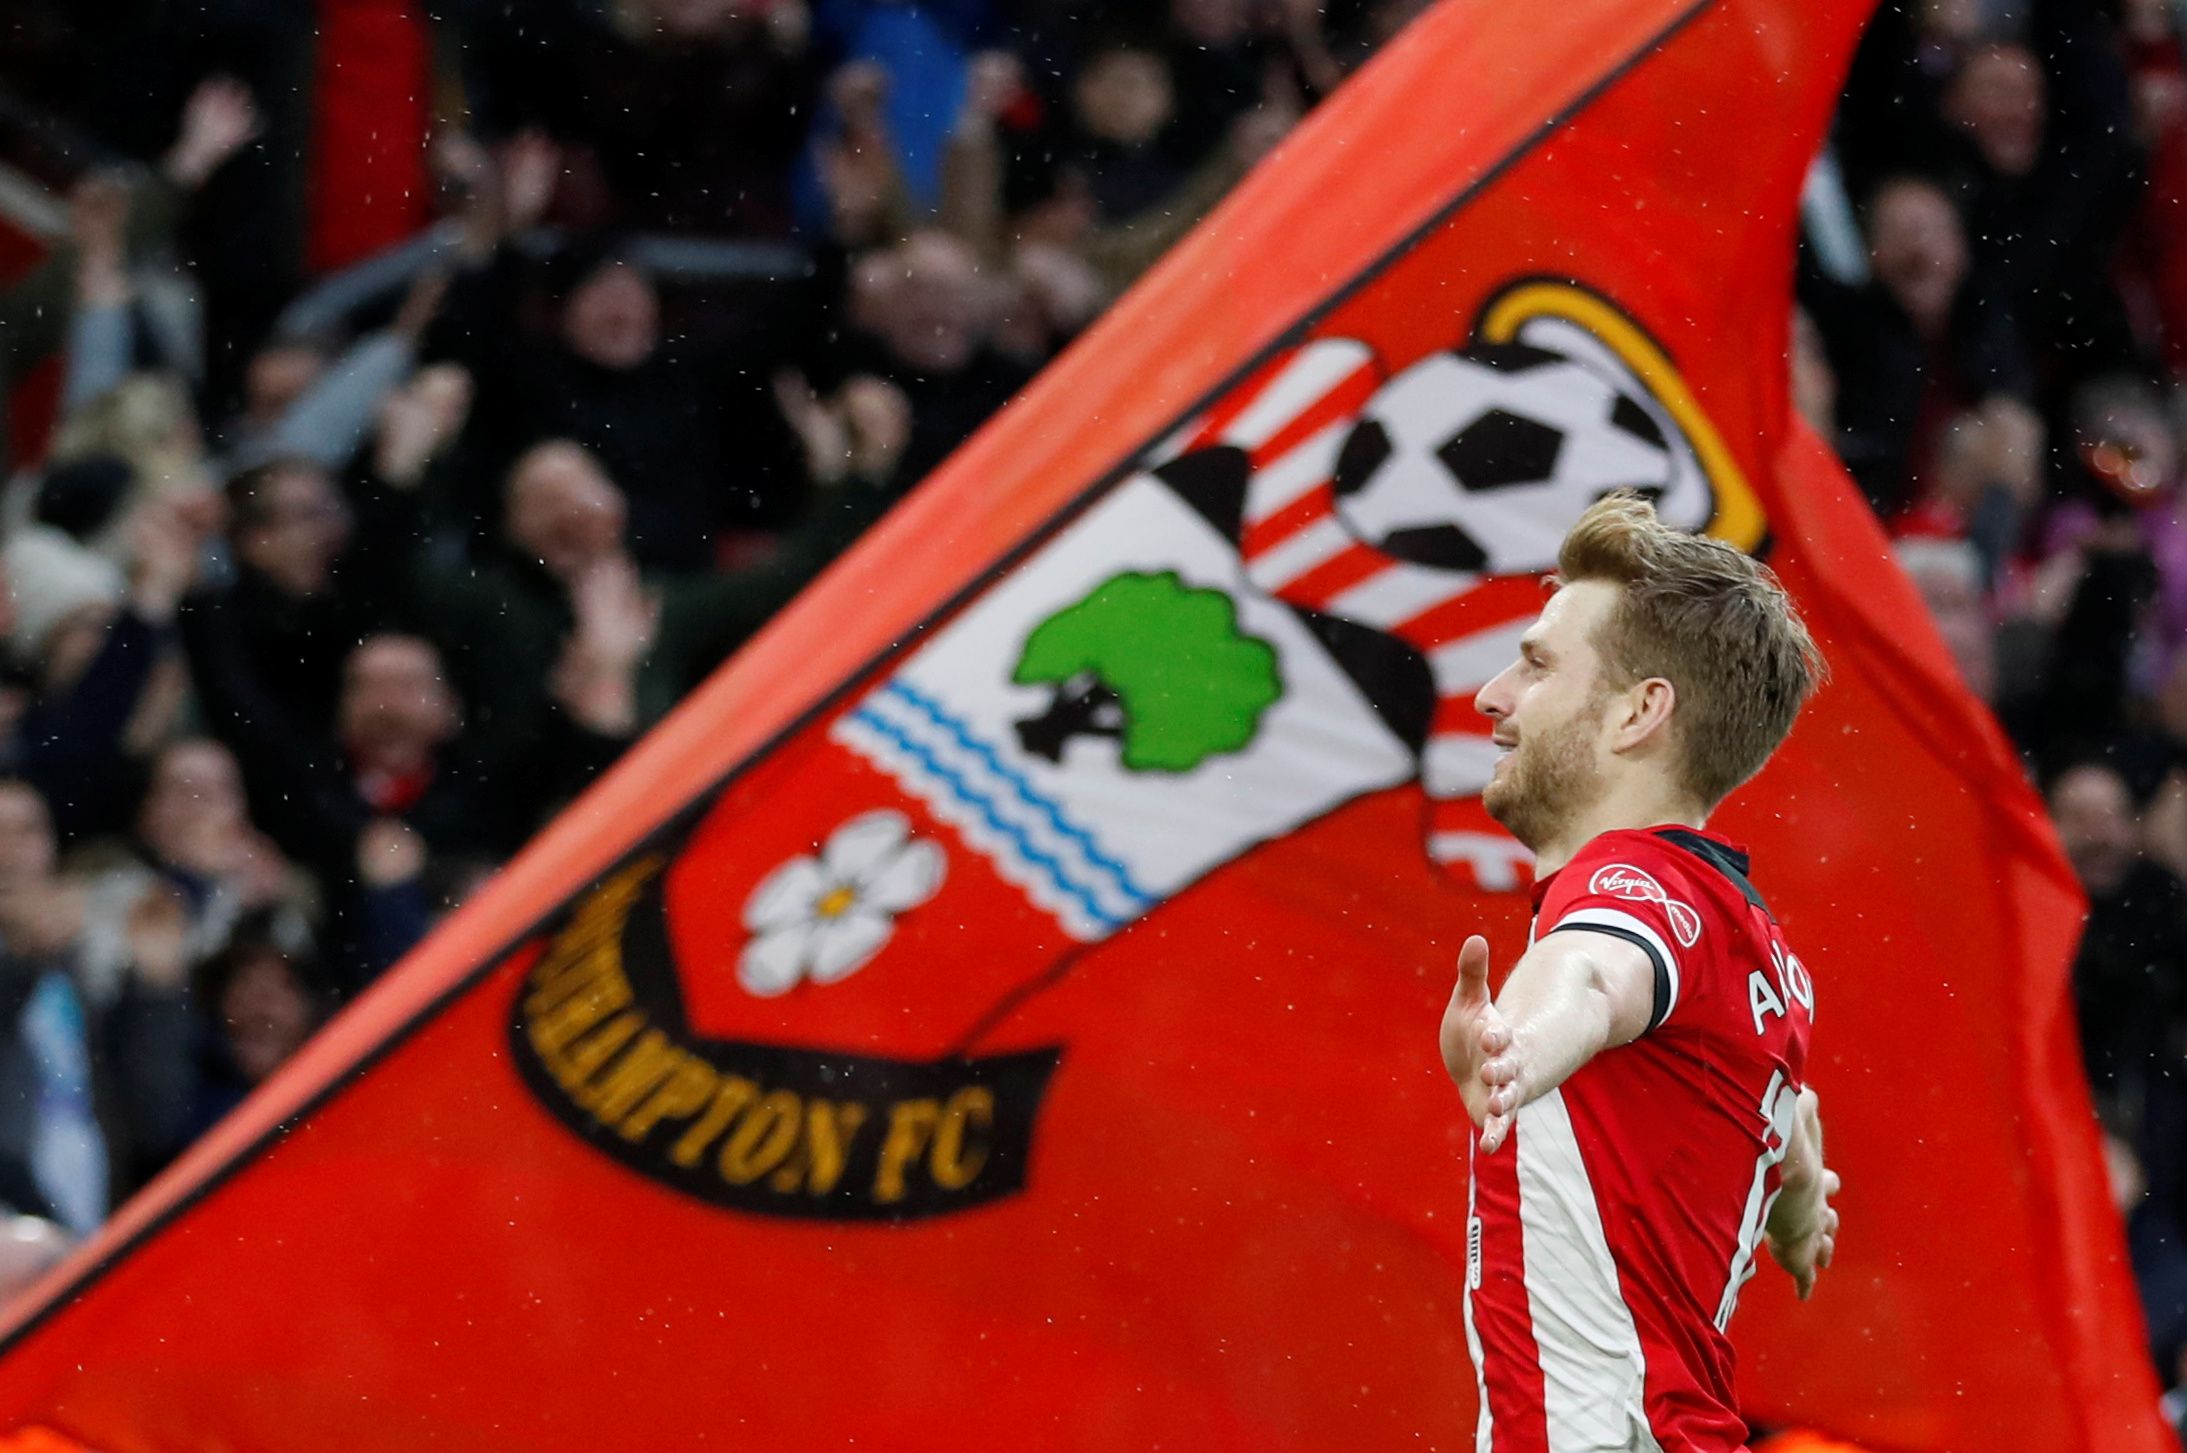 Soccer Football - Premier League - Southampton v Aston Villa - St Mary's Stadium, Southampton, Britain - February 22, 2020  Southampton's Stuart Armstrong celebrates scoring their second goal  Action Images via Reuters/Matthew Childs  EDITORIAL USE ONLY. No use with unauthorized audio, video, data, fixture lists, club/league logos or "live" services. Online in-match use limited to 75 images, no video emulation. No use in betting, games or single club/league/player publications.  Please contact y